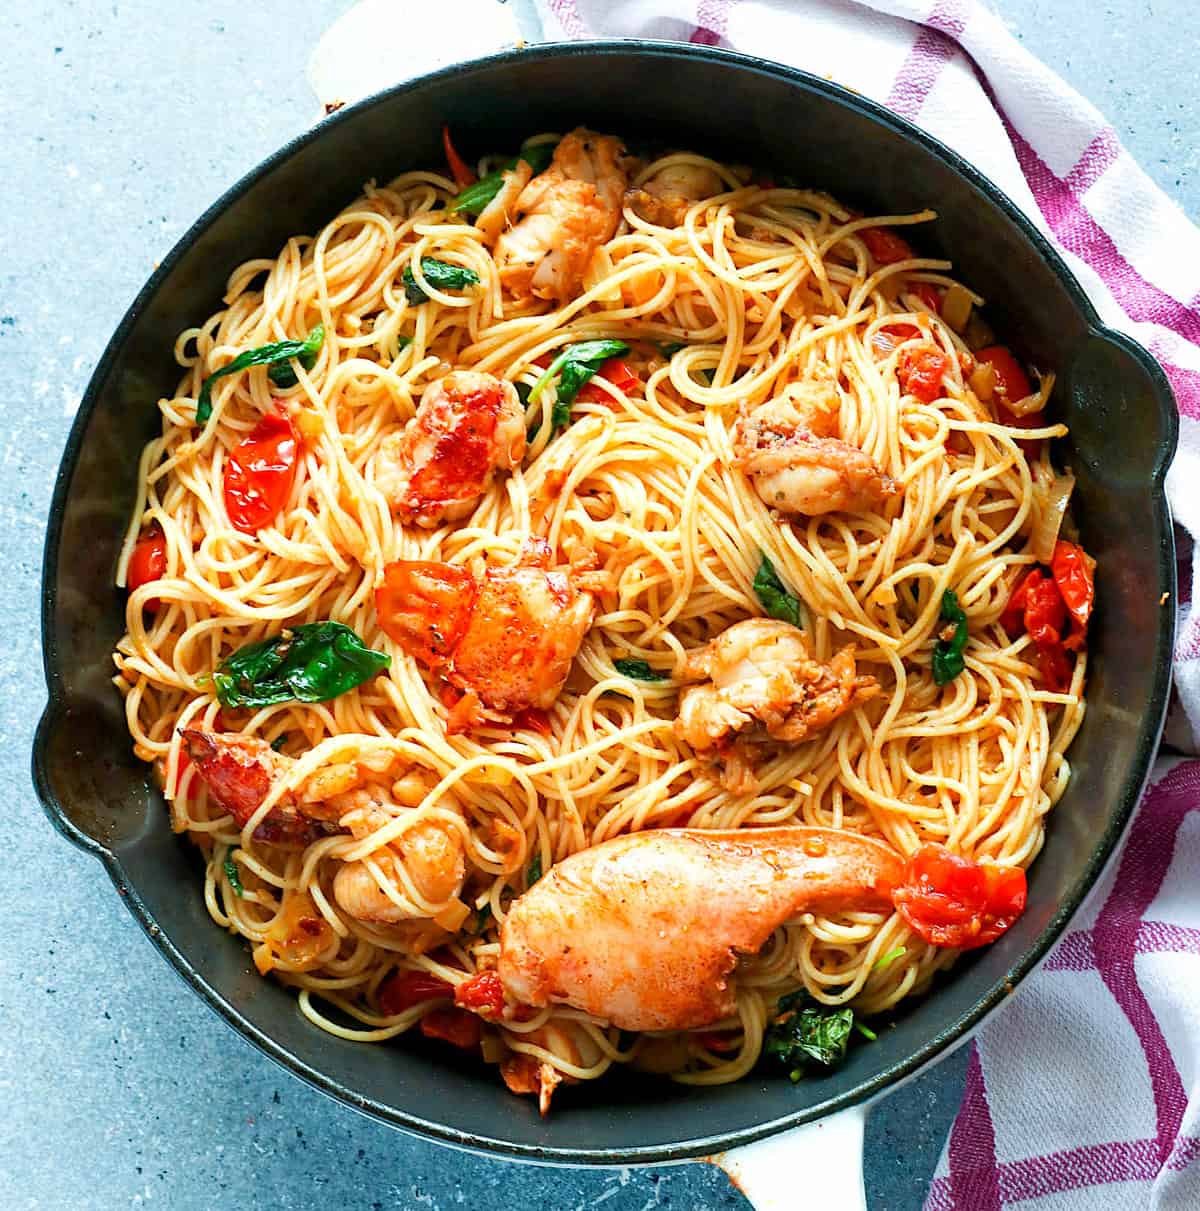 Lobster pasta freshly baked in a frying pan is incredibly delicious